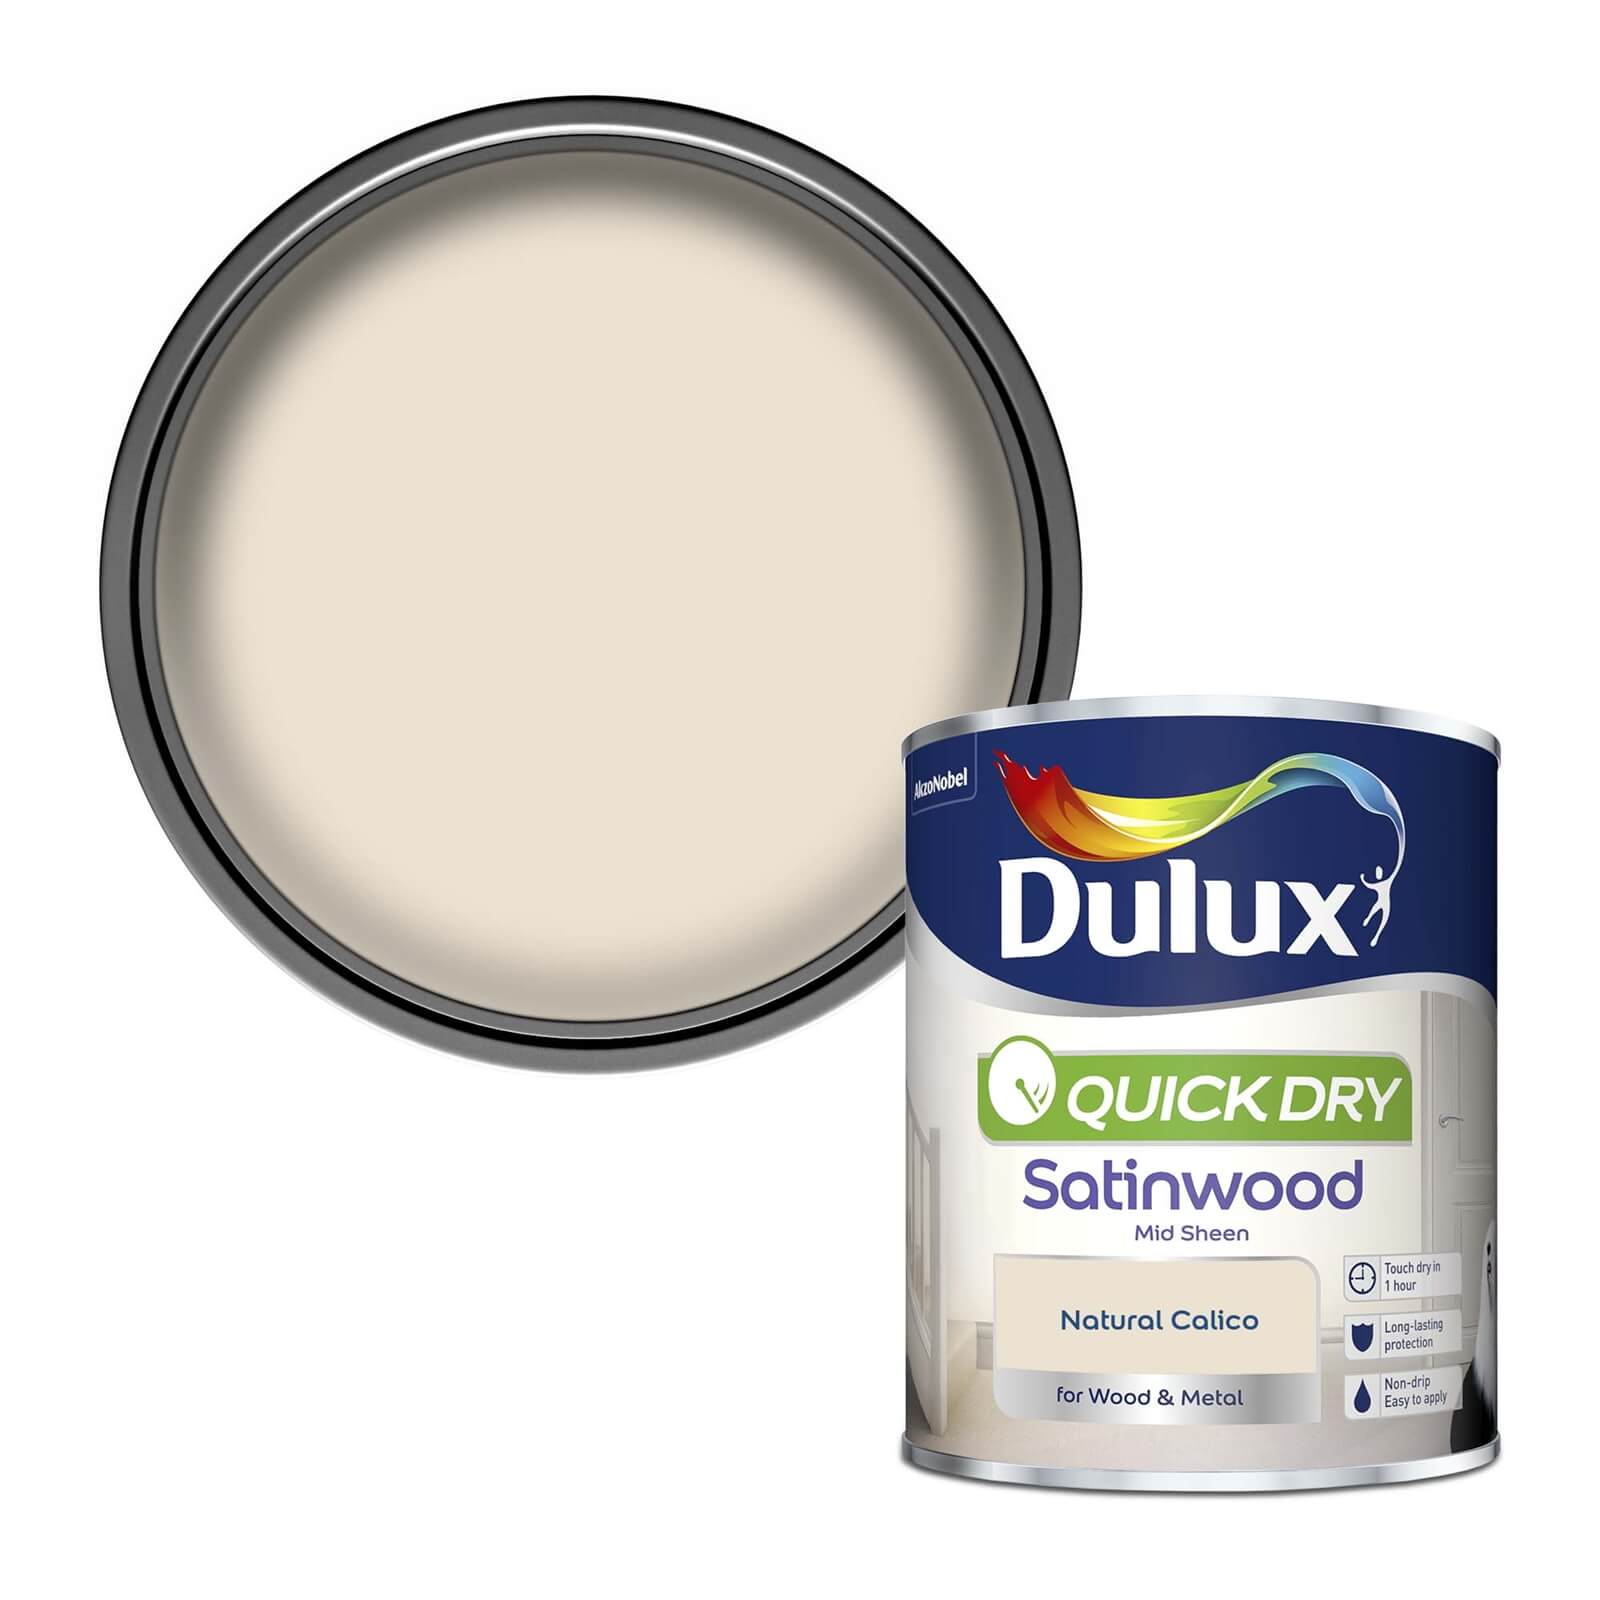 Photo of Dulux Natural Calico - Quick Dry Satinwood - 750ml